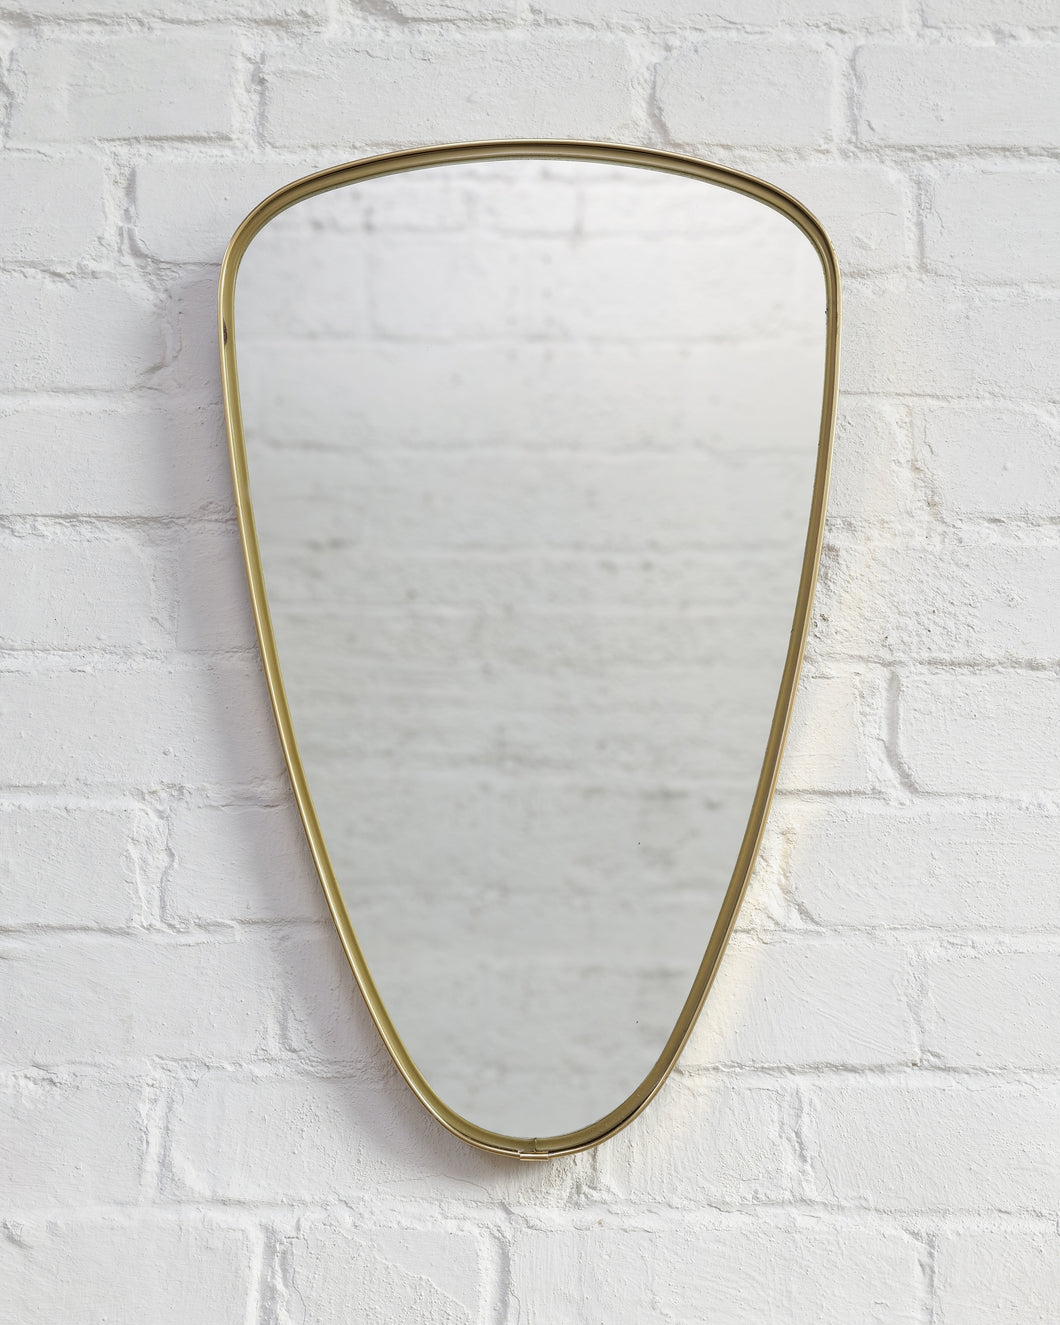 Brass Framed Mirror In the style of Gio Ponti